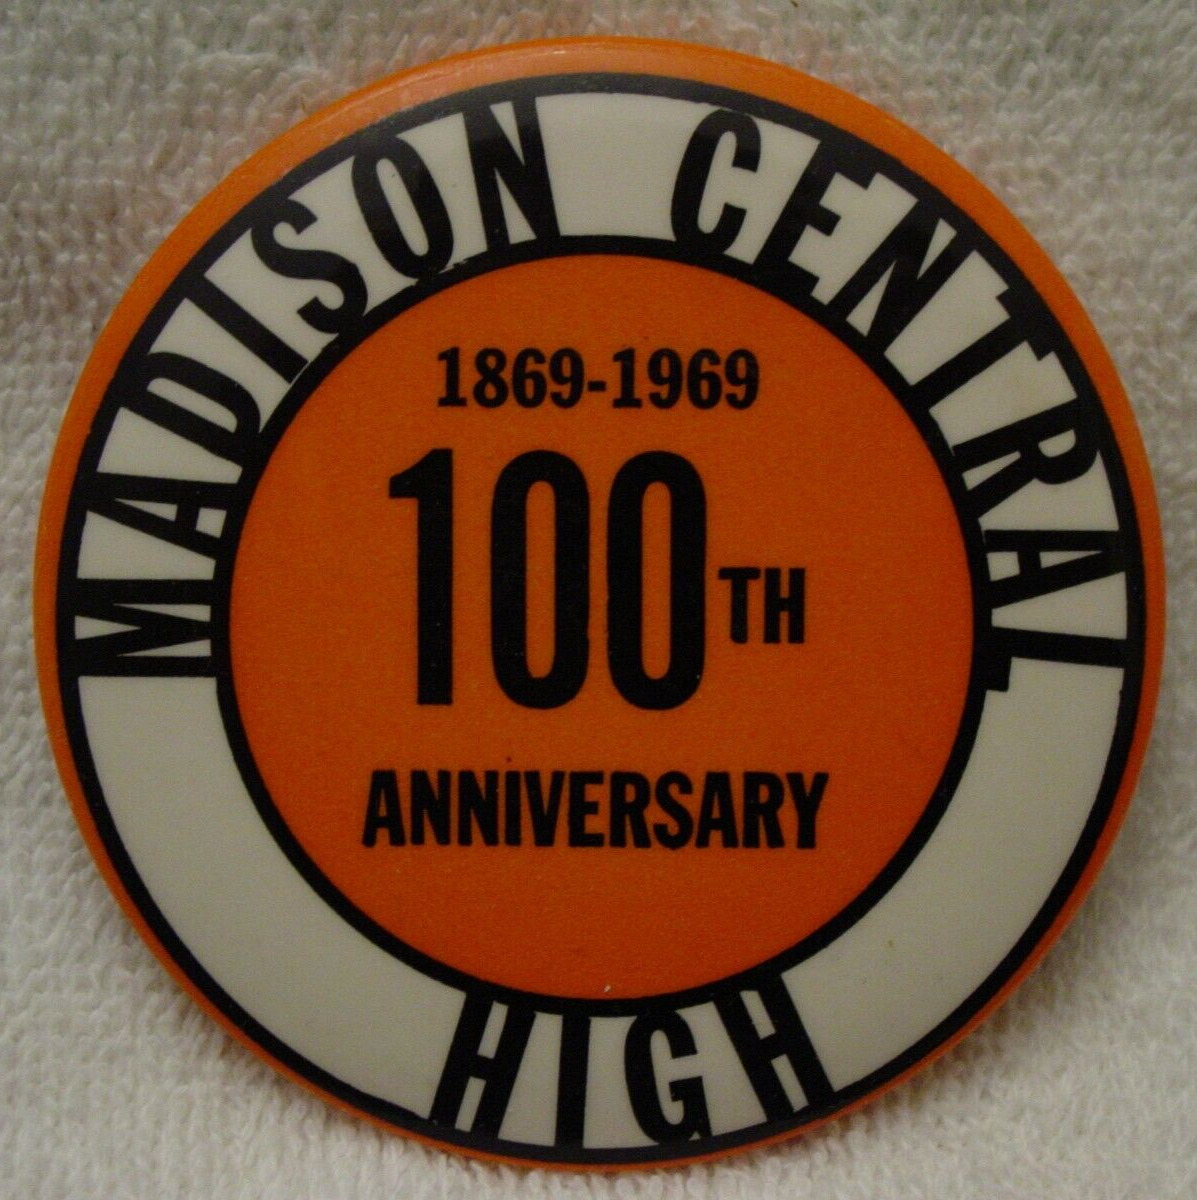 1869-1969 MADISON CENTRAL HIGH School MADISON, WI Pinback/Button/Pin Vintage Old